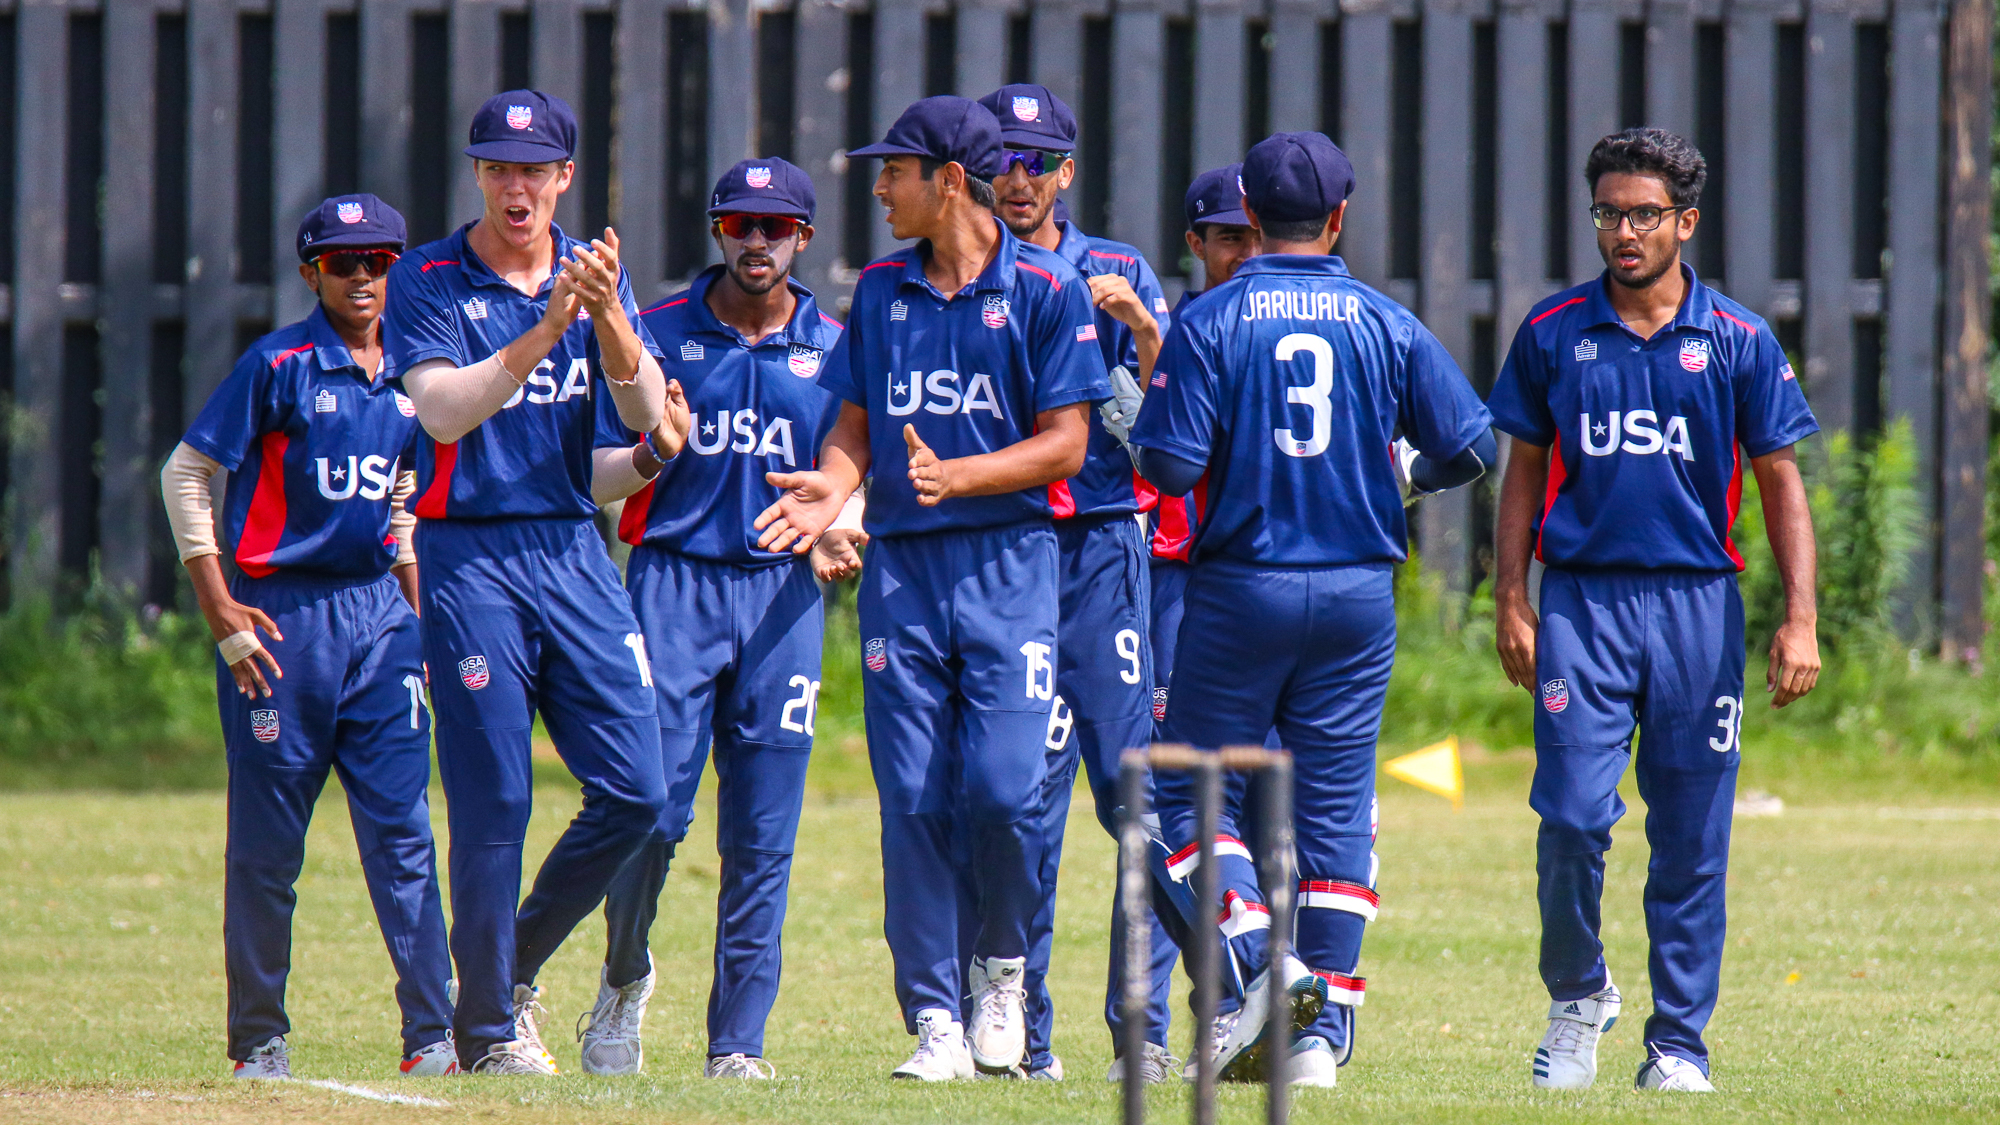 USA Cricket Announce Darlington and Mujtaba as Youth Coaches